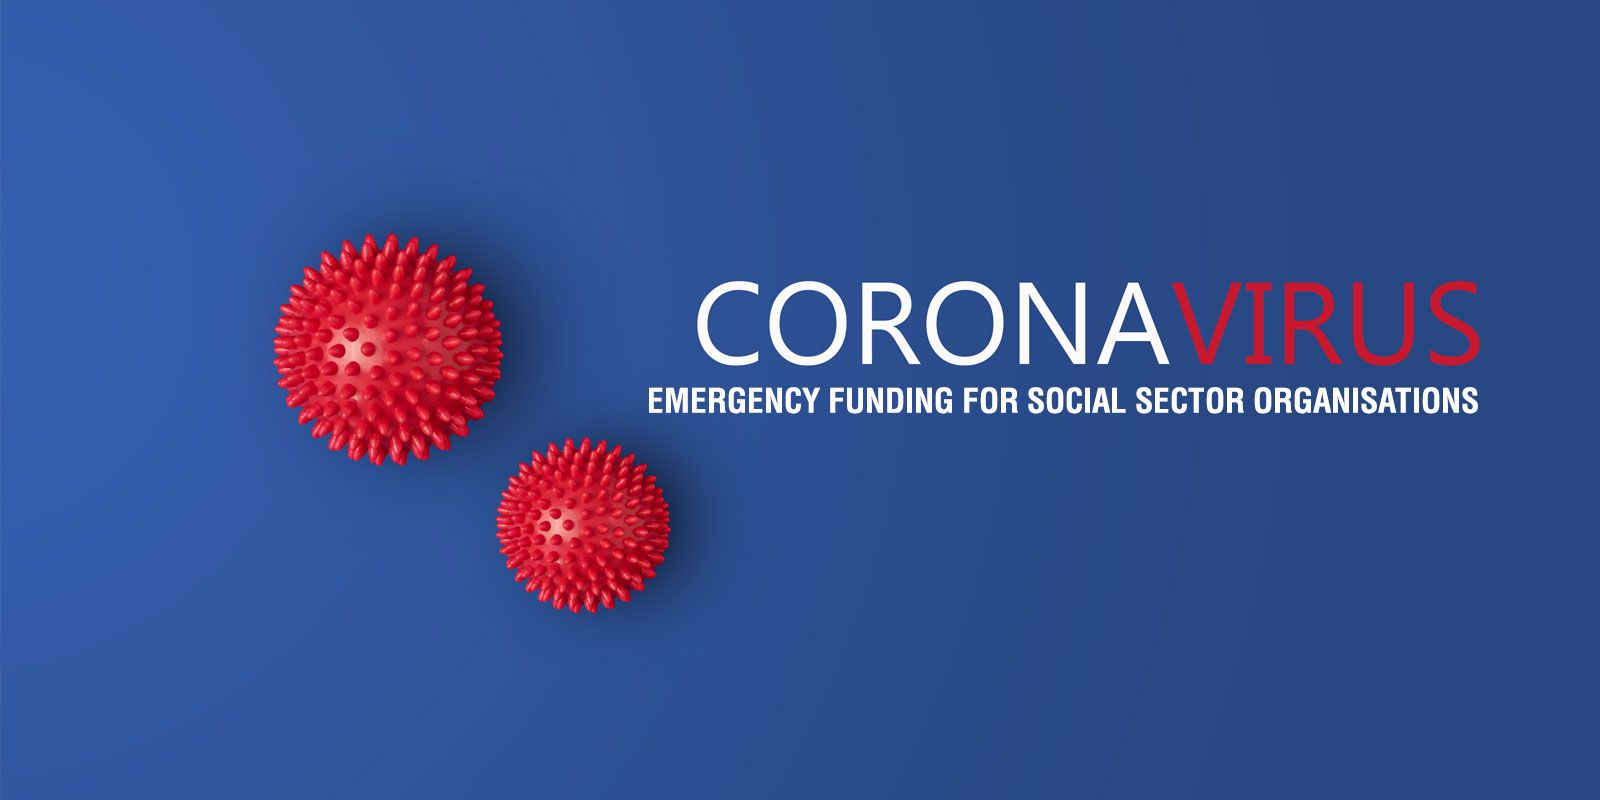 Emergency funding for social sector organisations